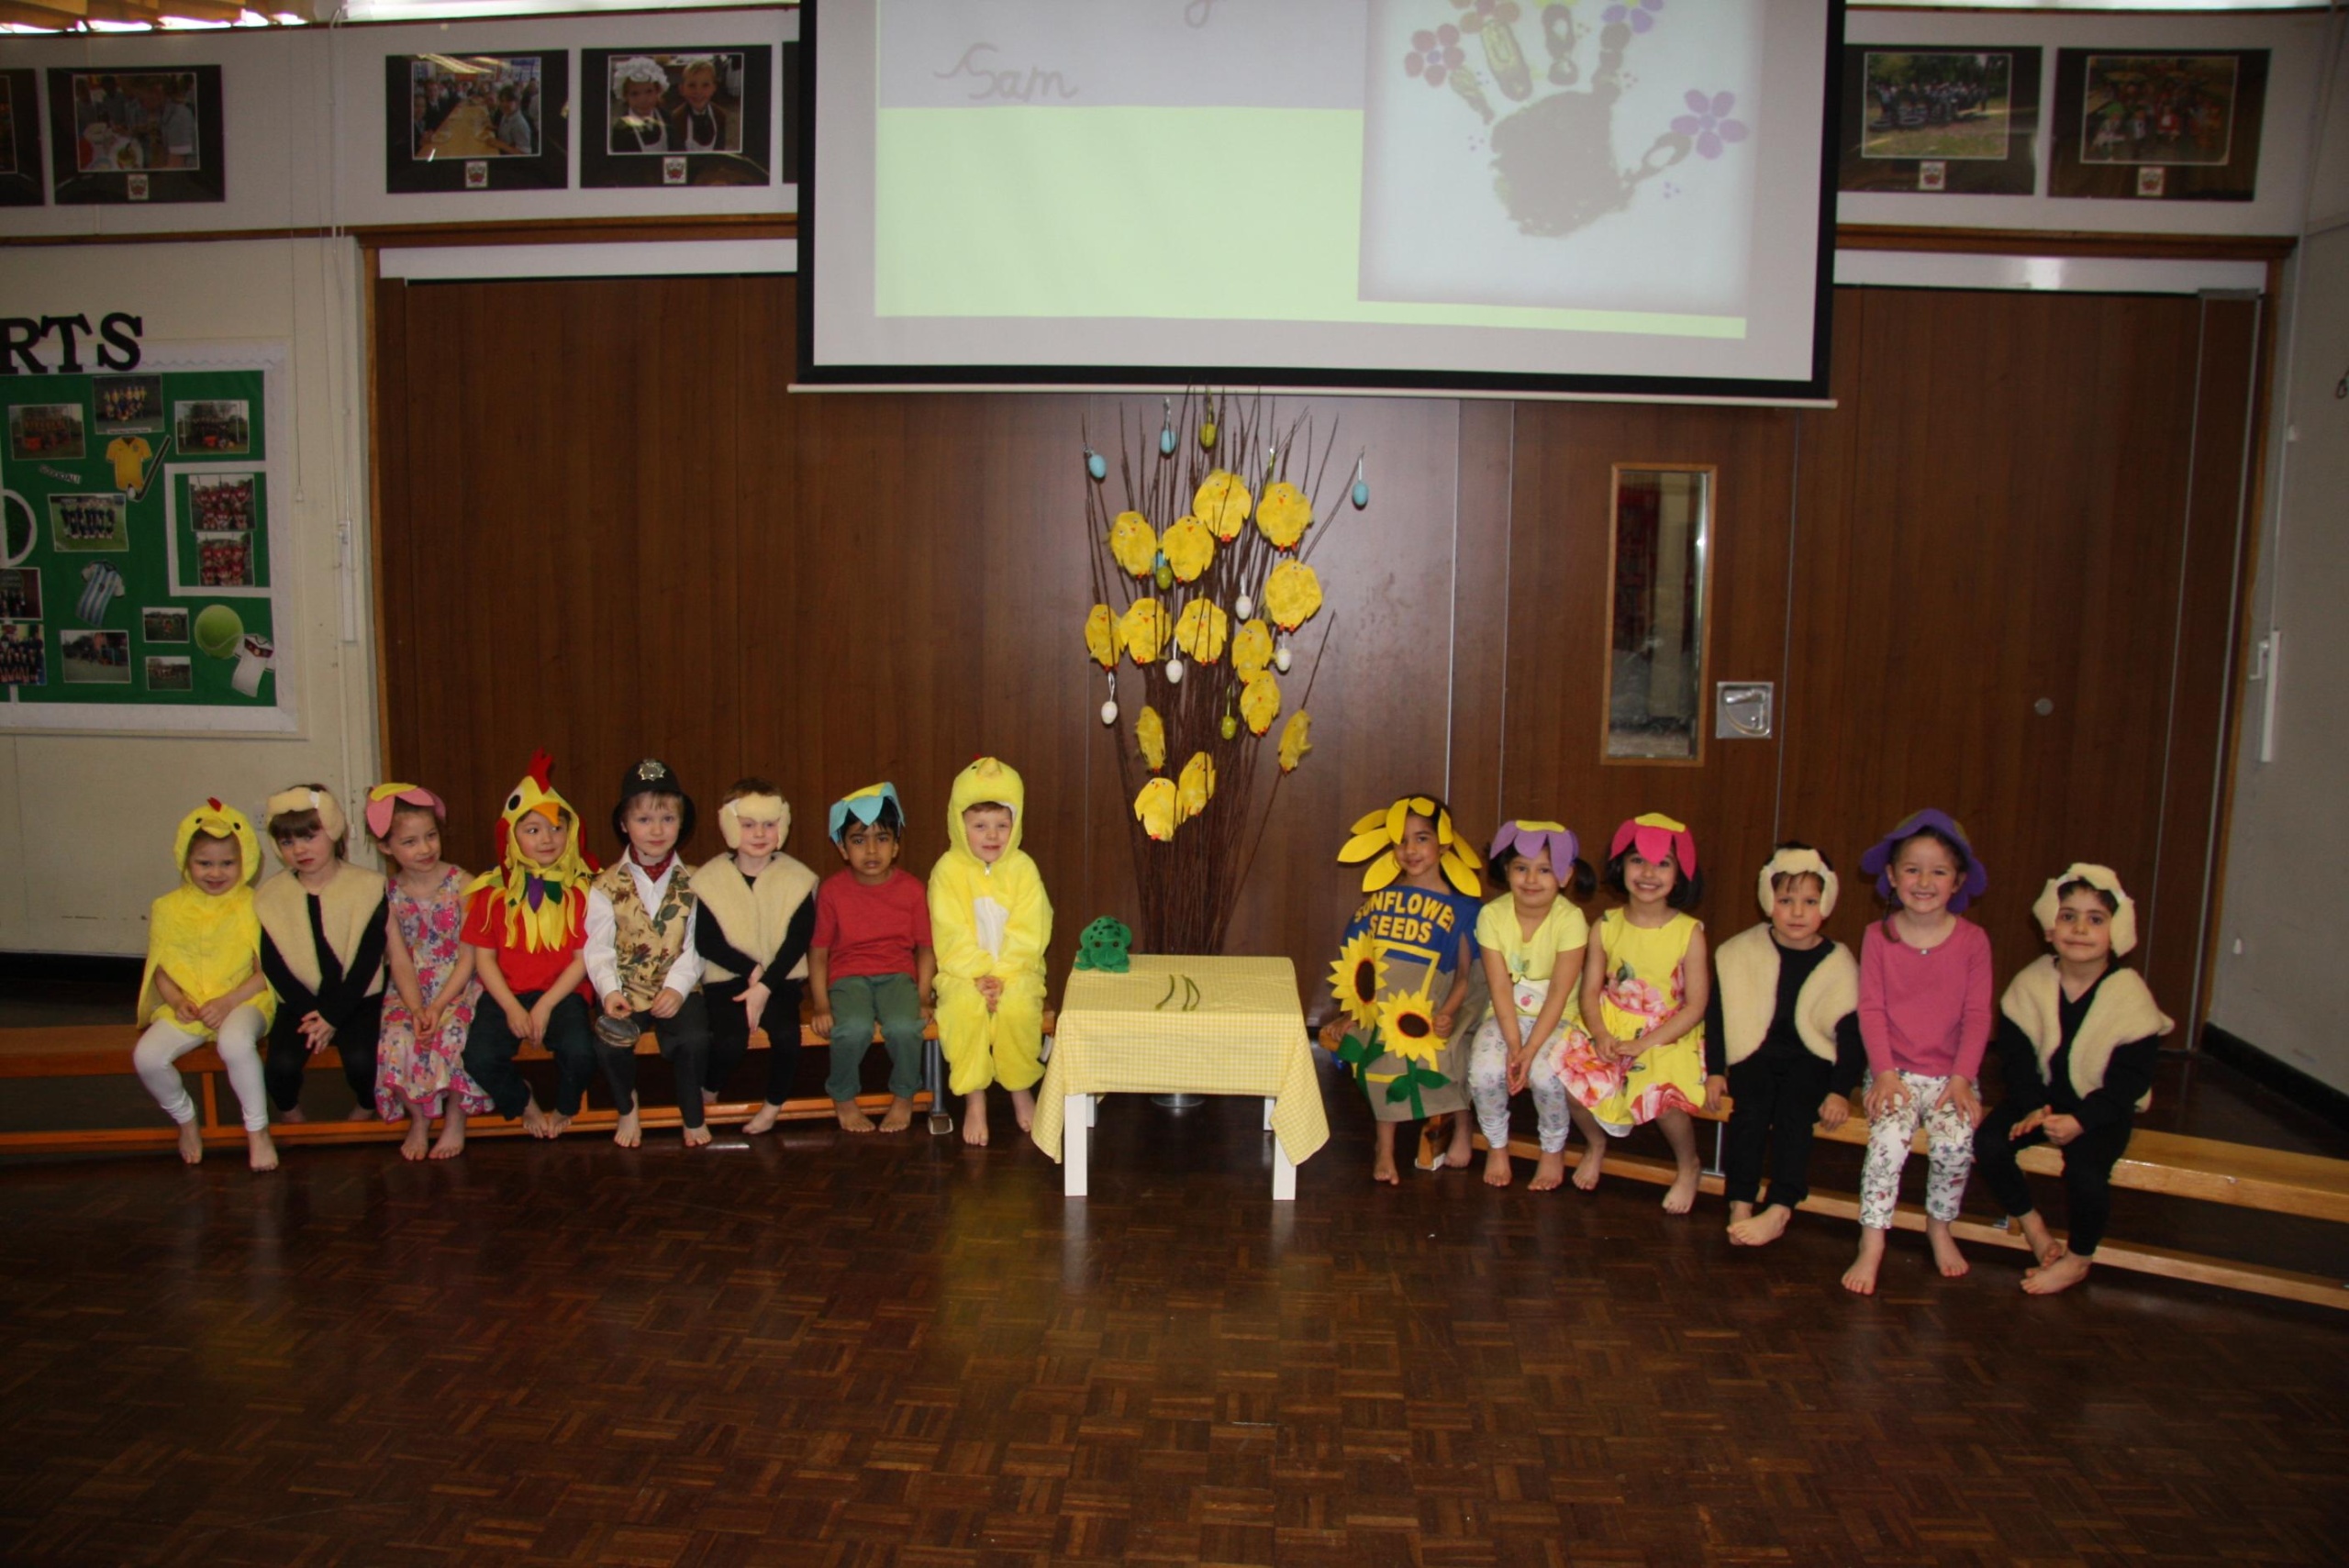 Reception pupils in class RC dressed as easter chicks and daffodils show off their springtime costumes for performing their class assembly